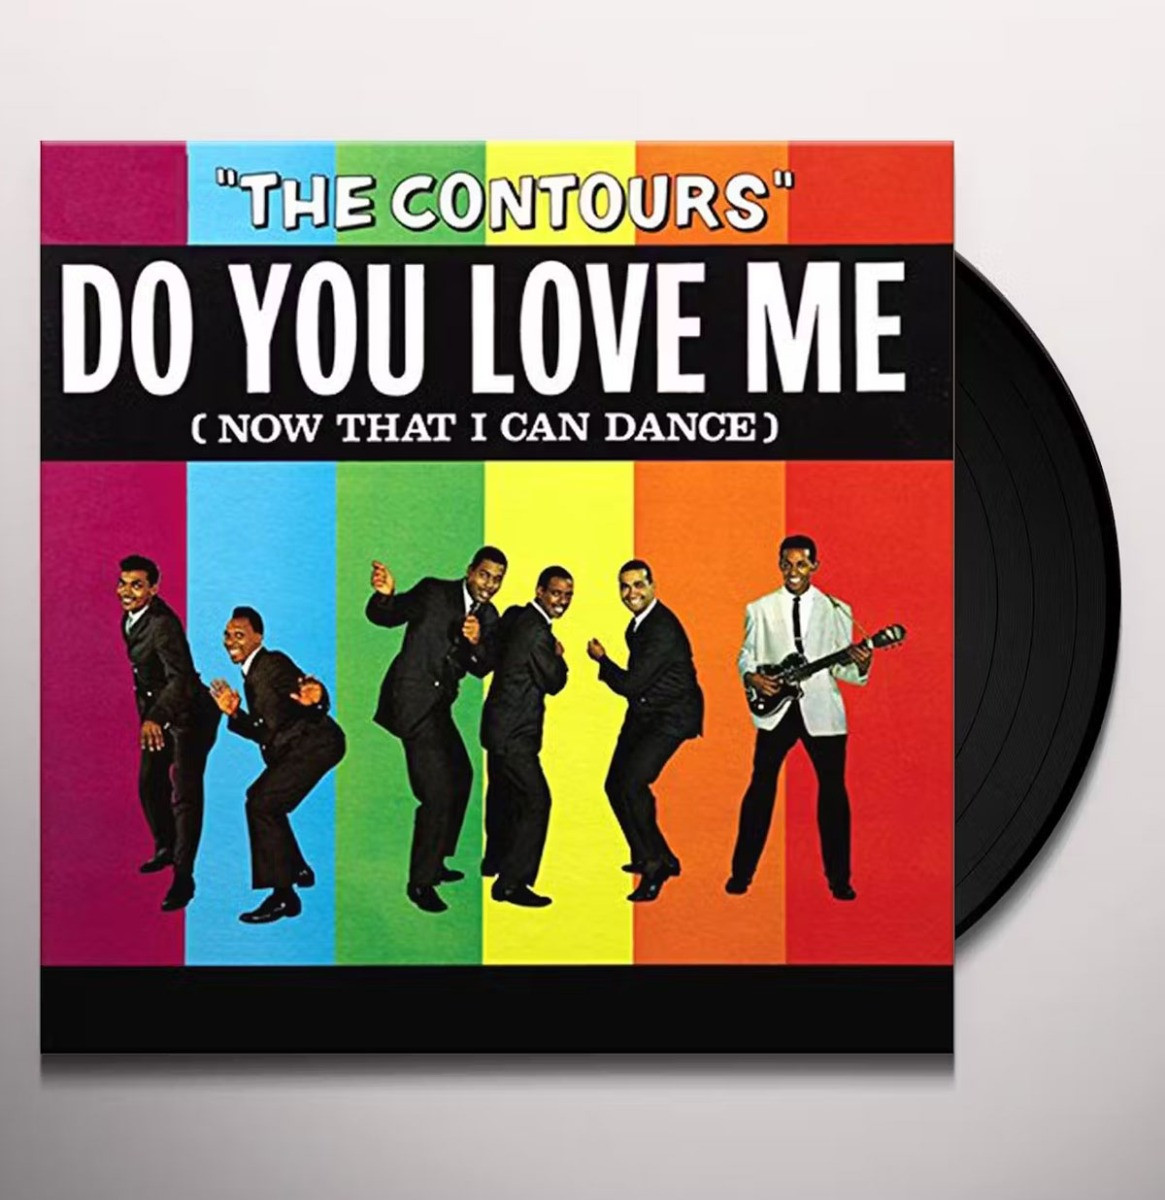 The Contours - Do You Love Me (Now That I Can Dance) LP